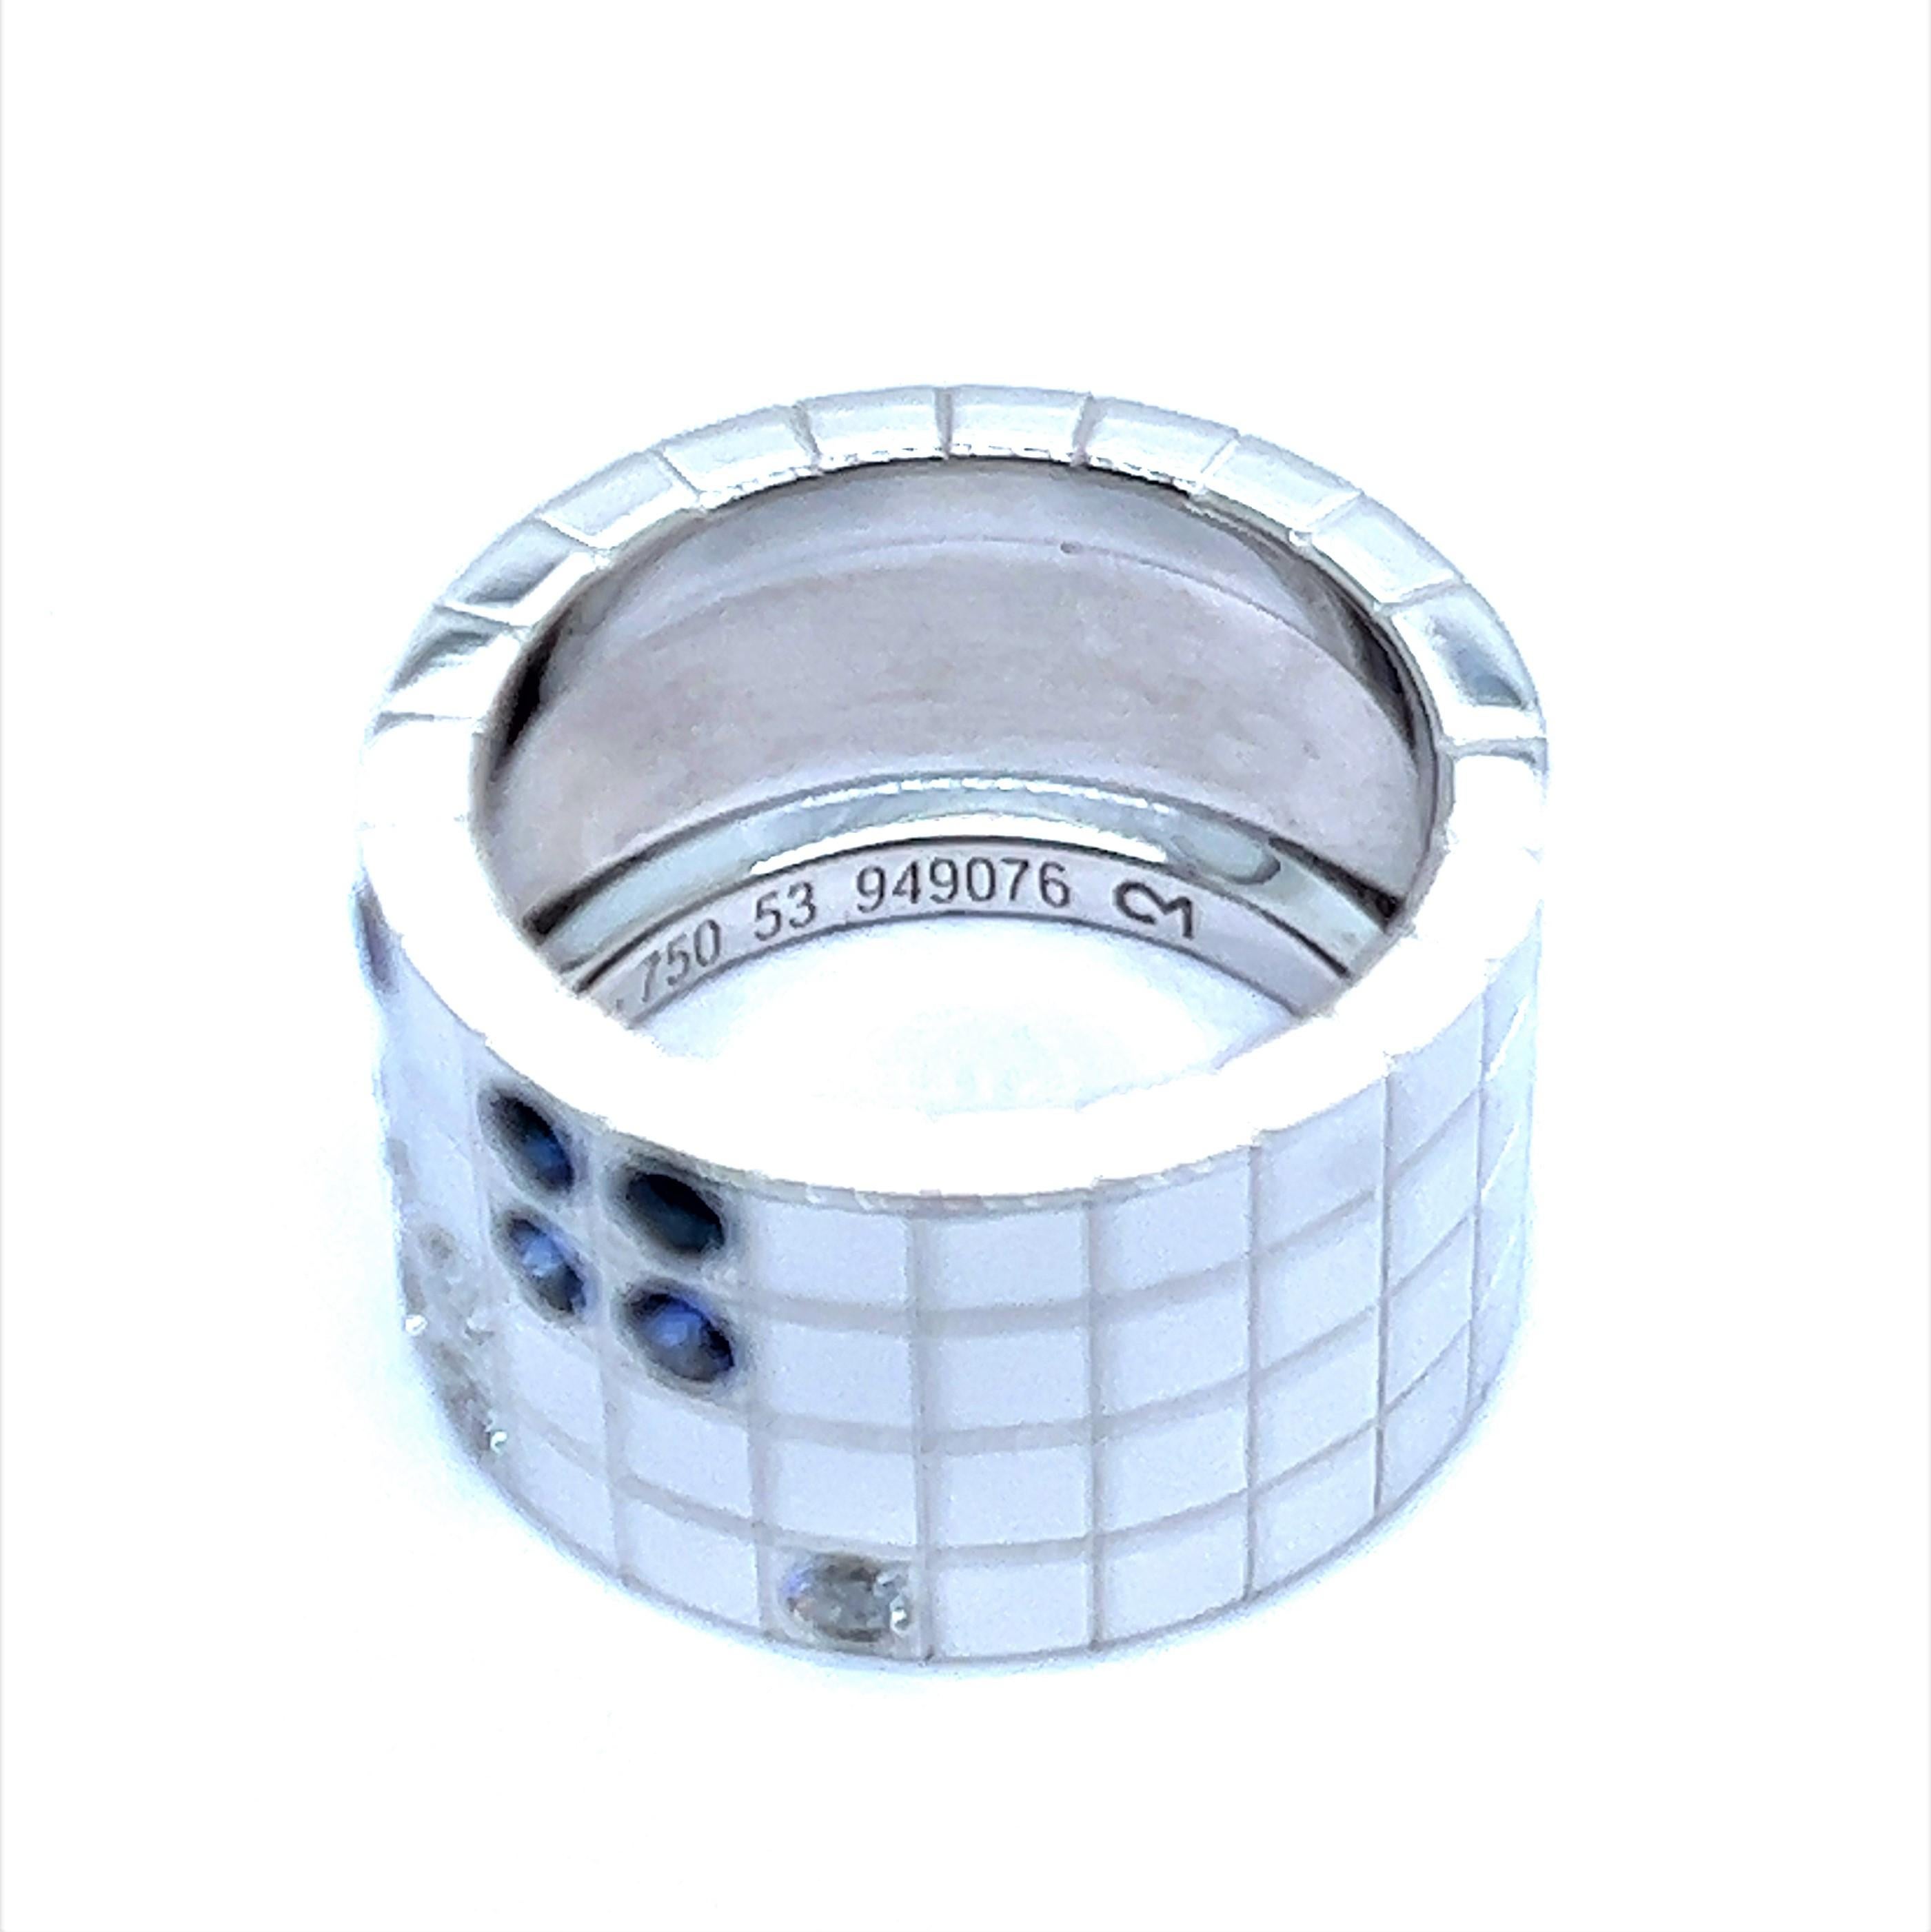 Brilliant Cut Cartier Lanière Ring with Sapphires and Diamonds in 18 Karat White Gold For Sale